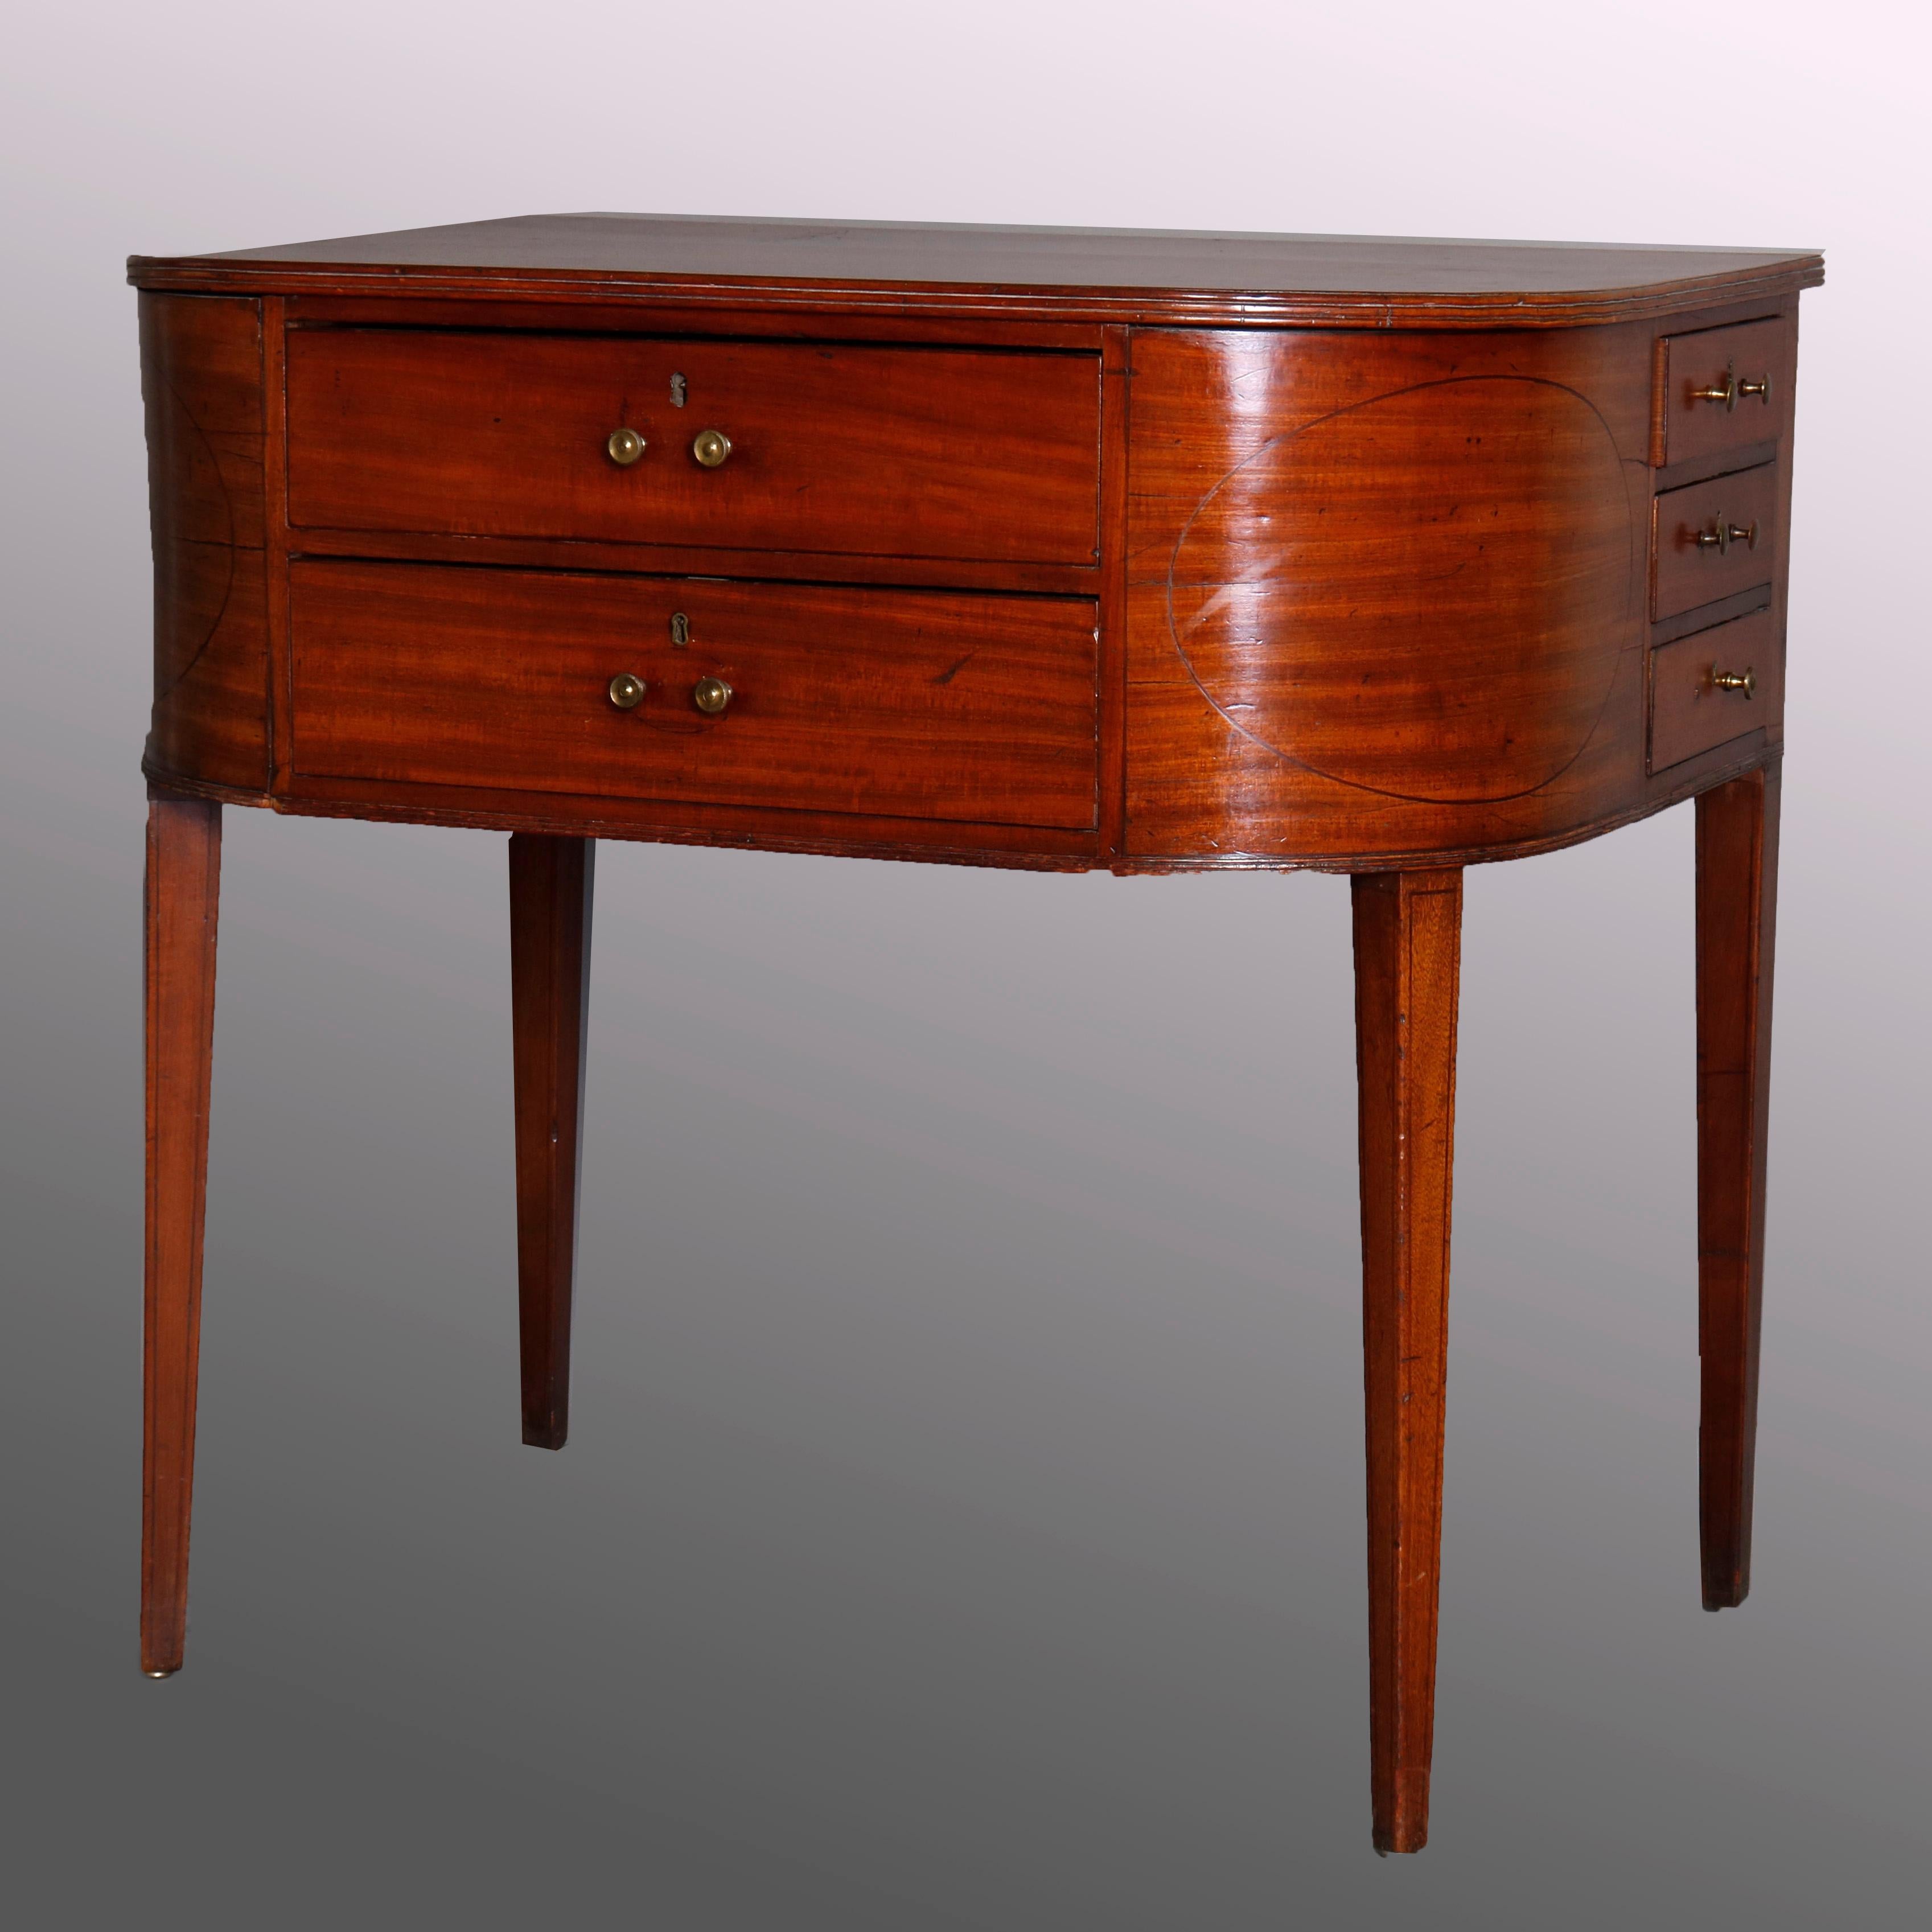 An antique Hepplewhite style rent table offers unusual form in mahogany construction with face having 2 long drawers flanked by bentwood panels with ebonized inlay medallions, sides with three smaller drawers each, raised on tapered square legs,